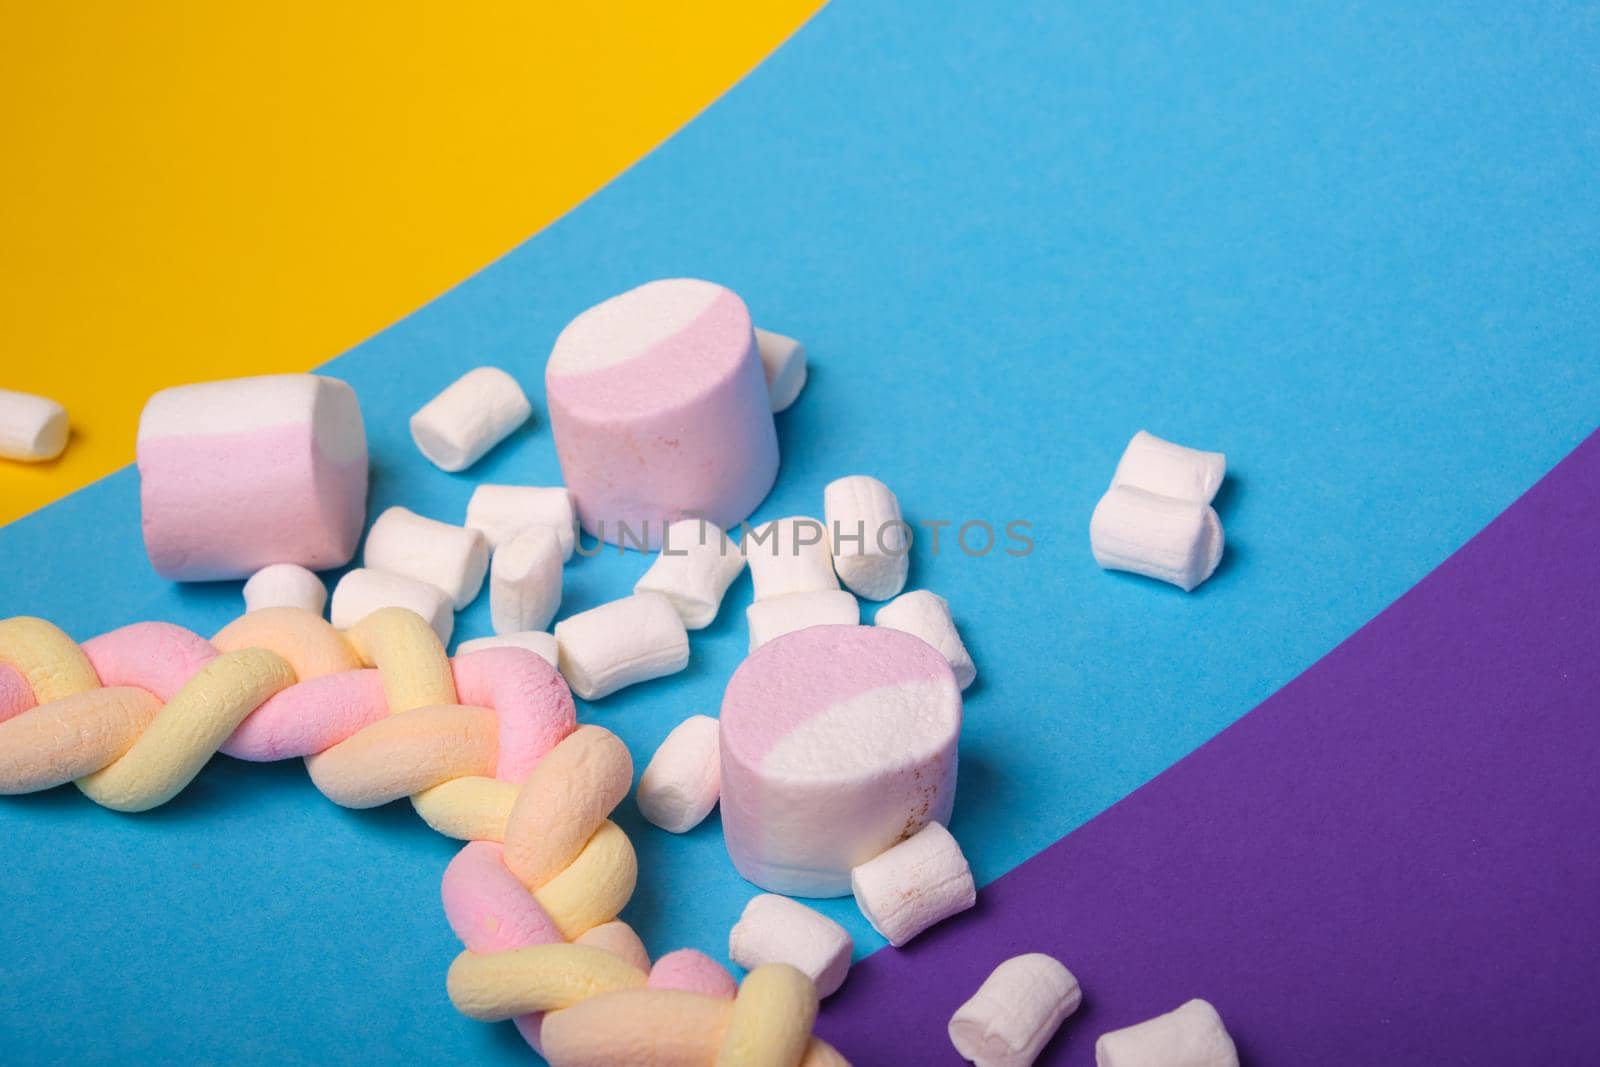 different types of marshmallows with different flavors on a bright colored background, long spaghetti-shaped marshmallows are braided in a pigtail